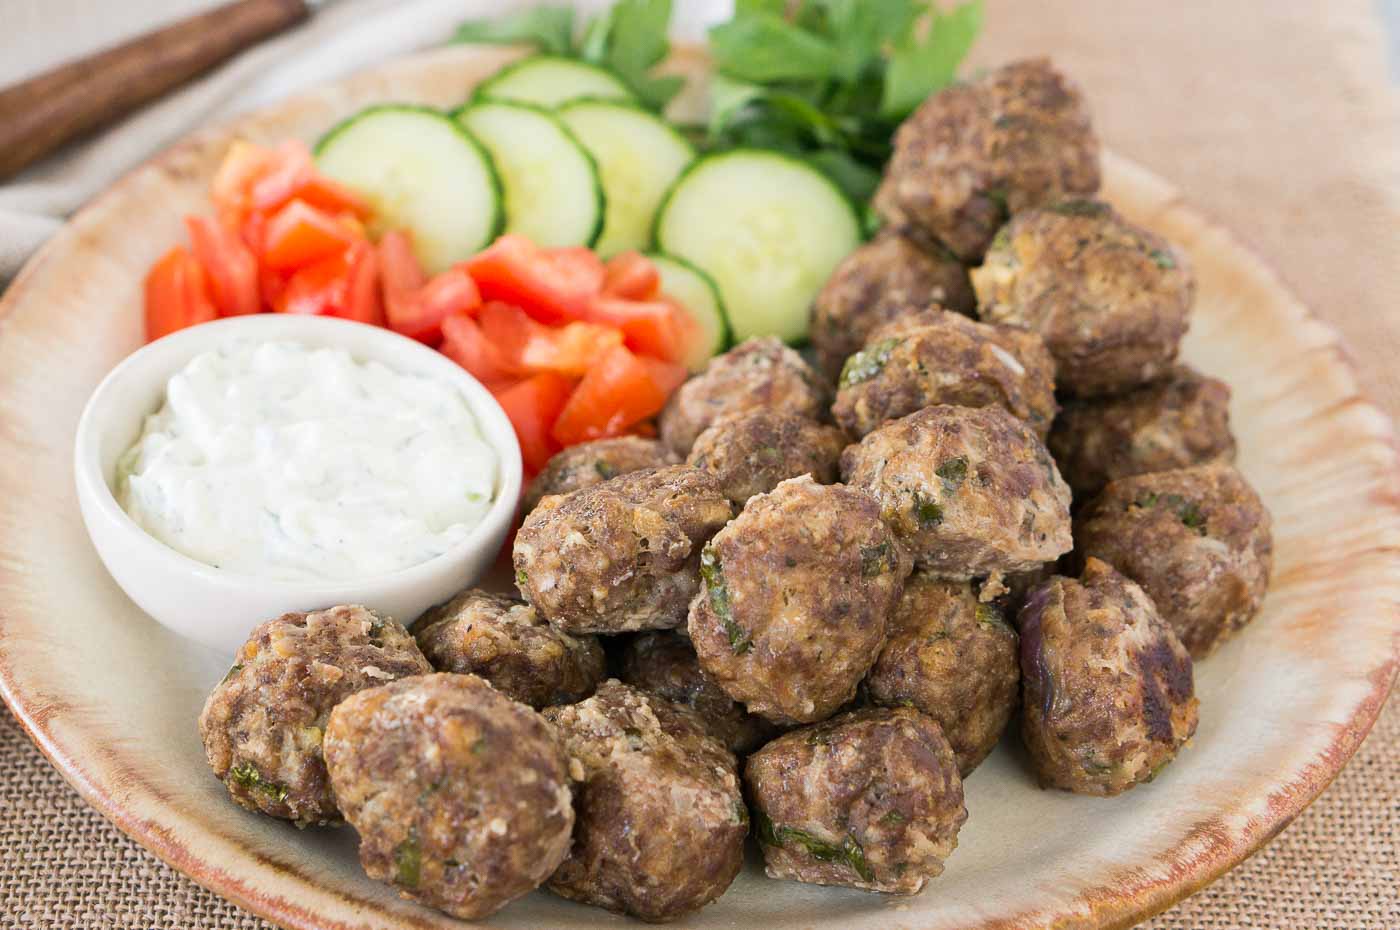 greek meatballs on a plate with vegetables